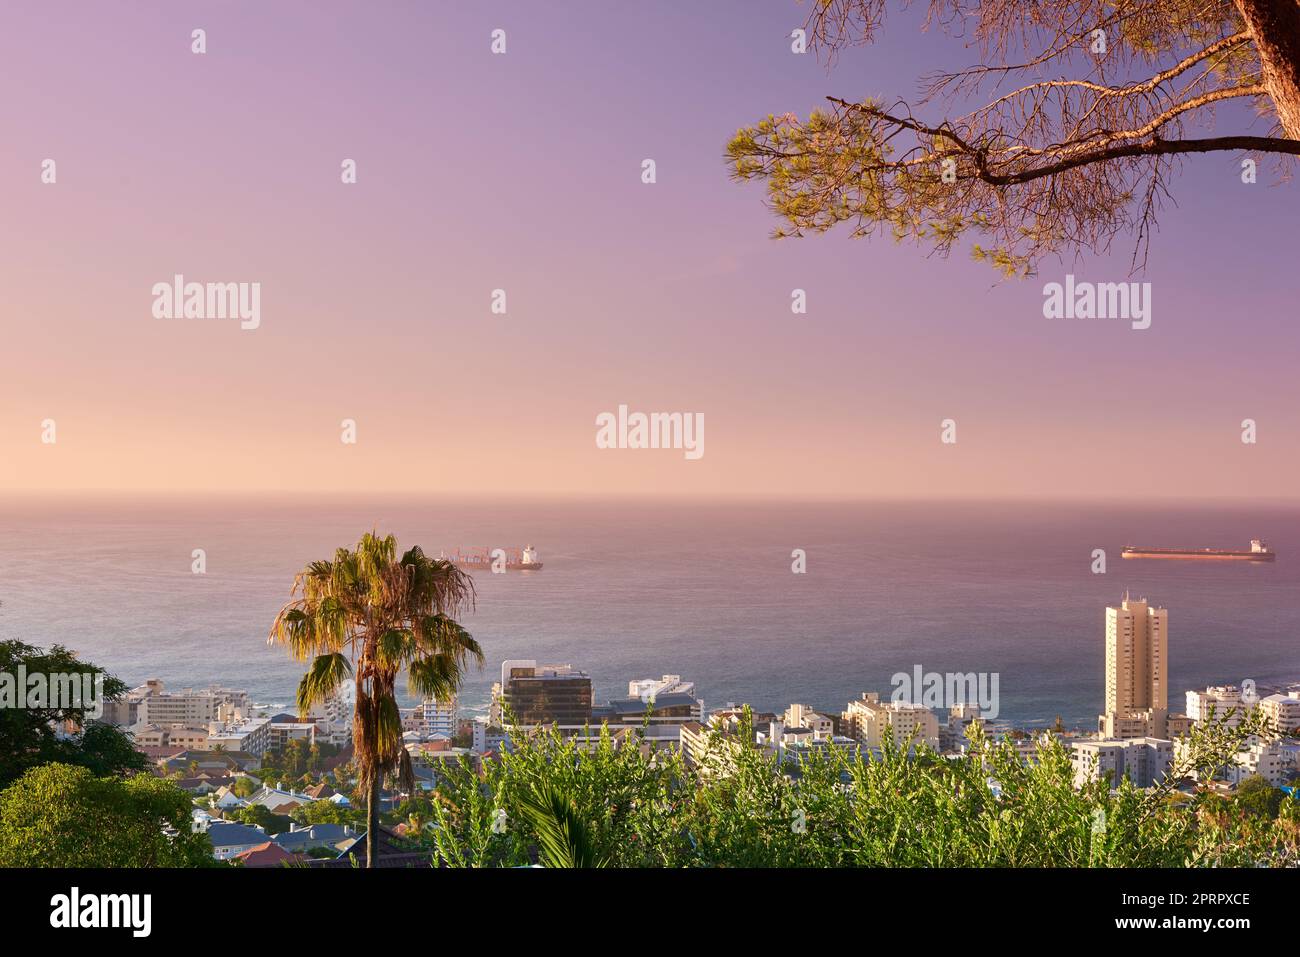 Take a vacation in paradise. a city on the coastline with mountains surrounding it. Stock Photo